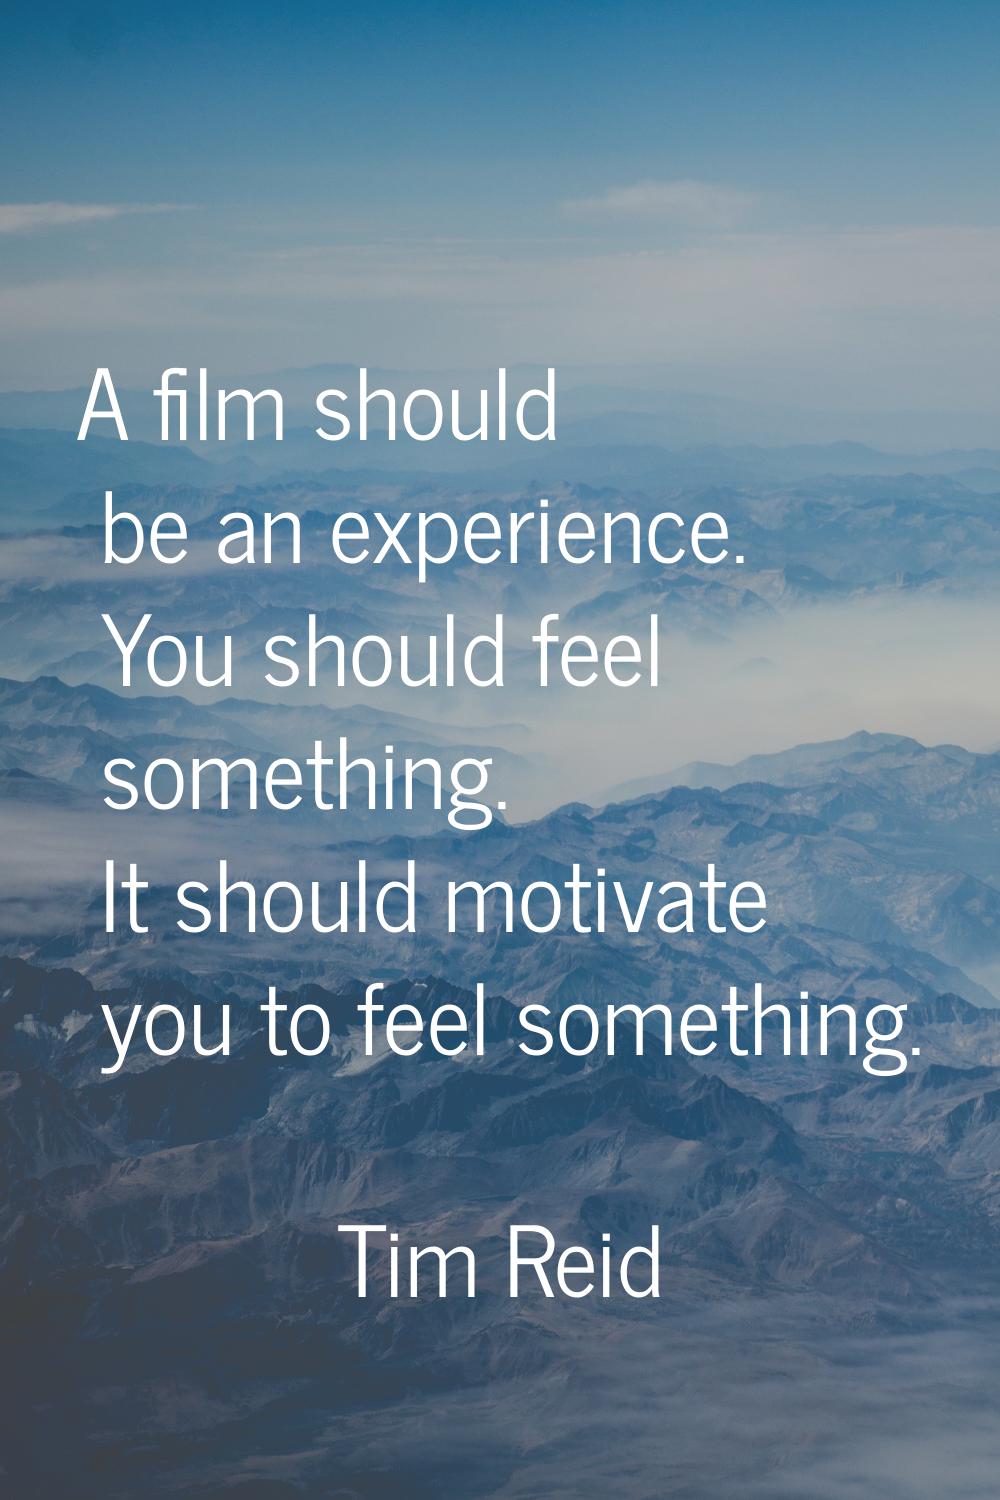 A film should be an experience. You should feel something. It should motivate you to feel something